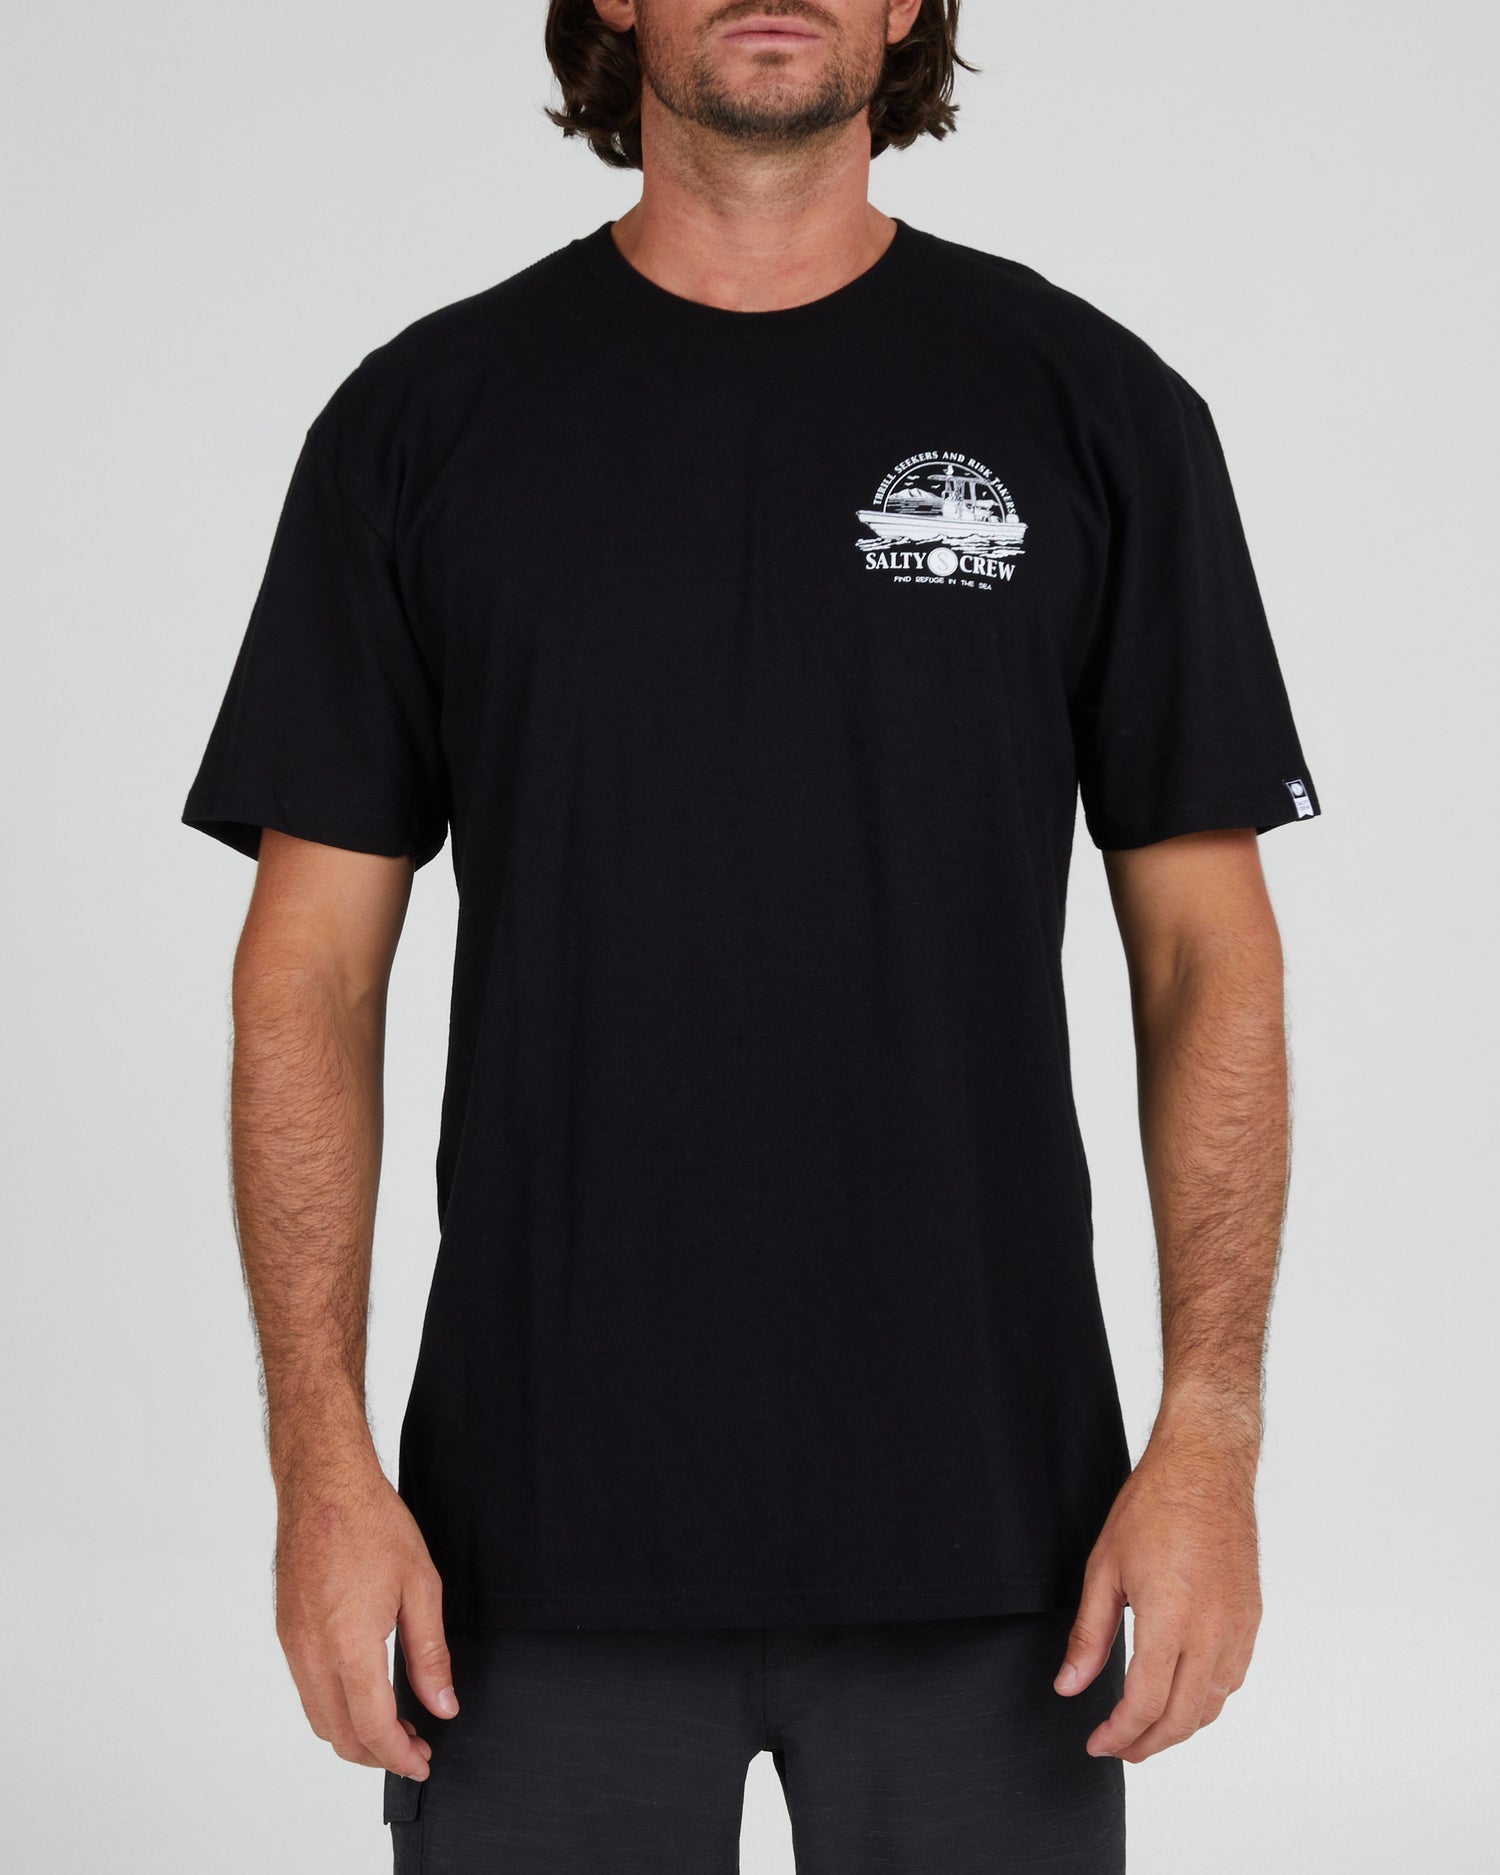 On body front of the Super Panga Black S/S Standard Tee